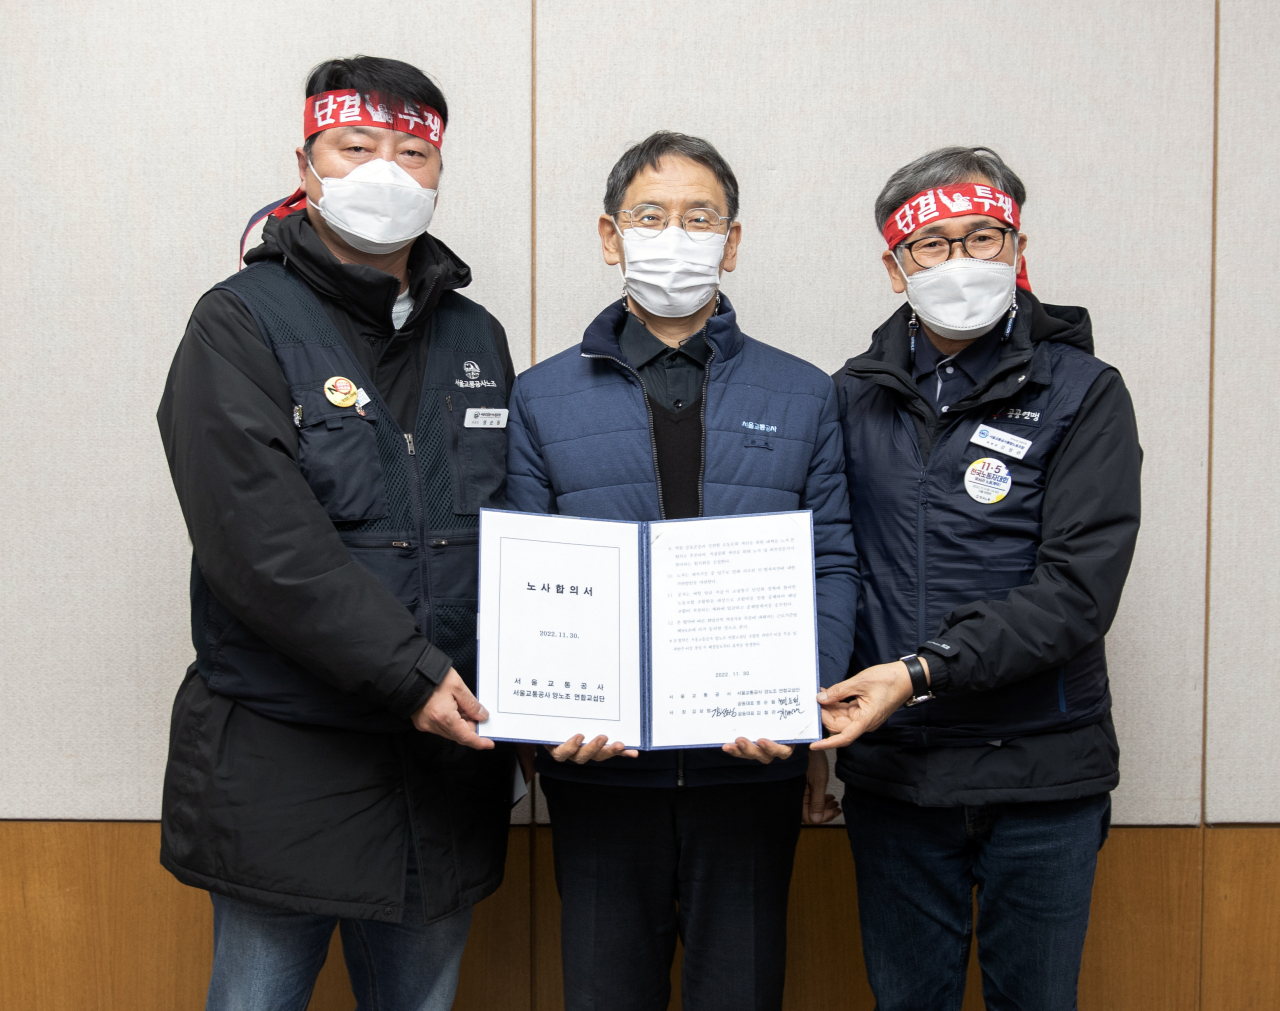 Representatives of Seoul Transportation Corp. unionized workers and management pose for a photo on Thursday at around midnight to celebrate the labor-management agreement. (Seoul Transportation Corp.)